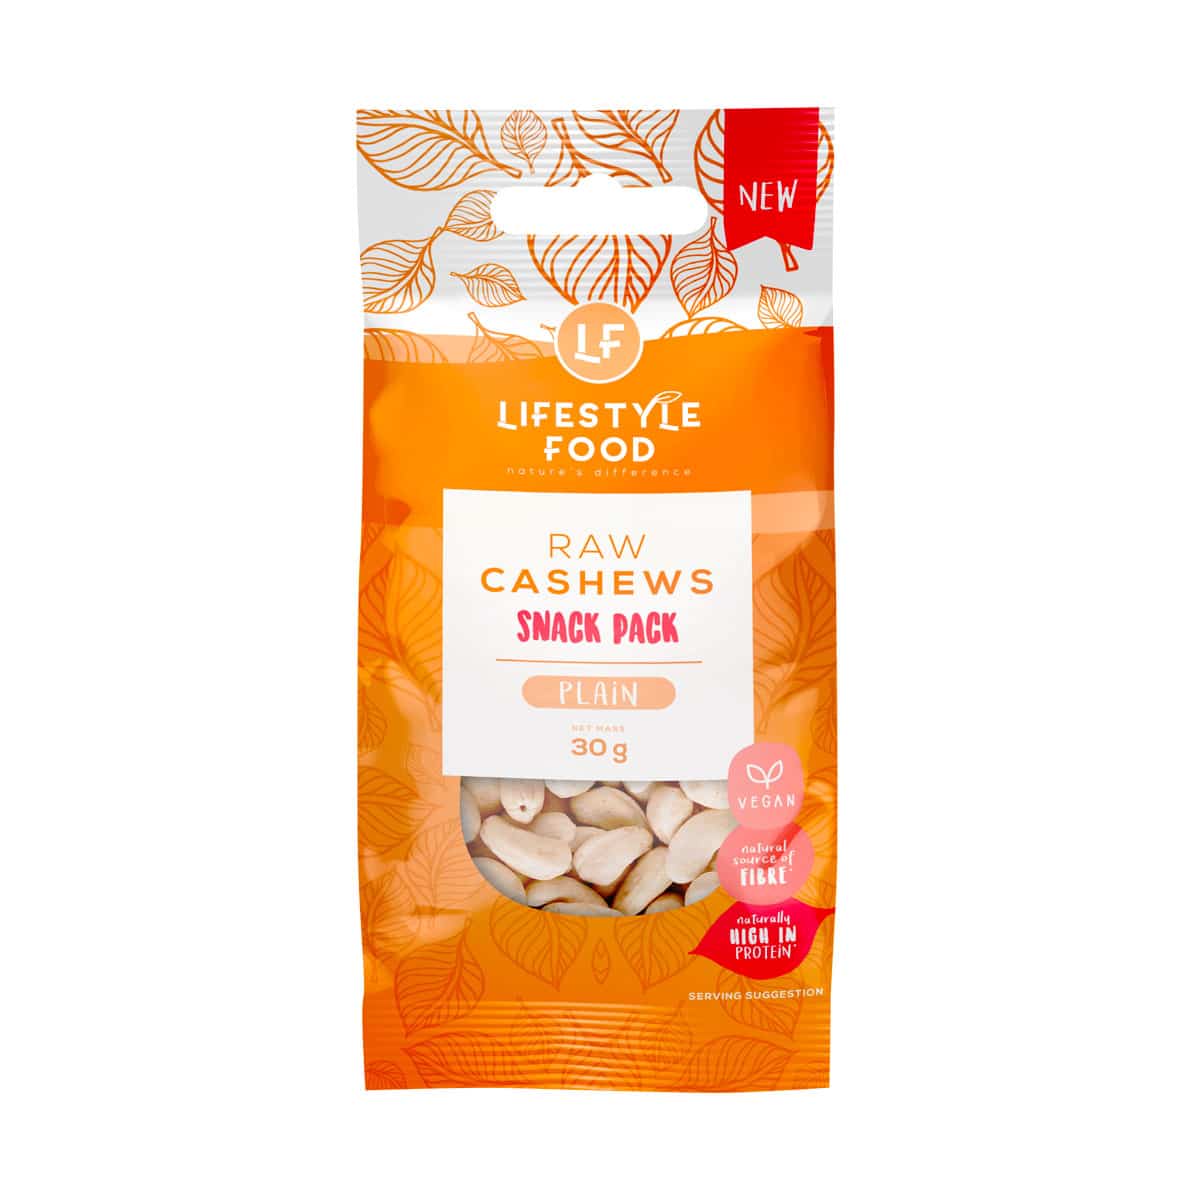 Lifestyle Food Cashew Snack Pack Plain - 30g